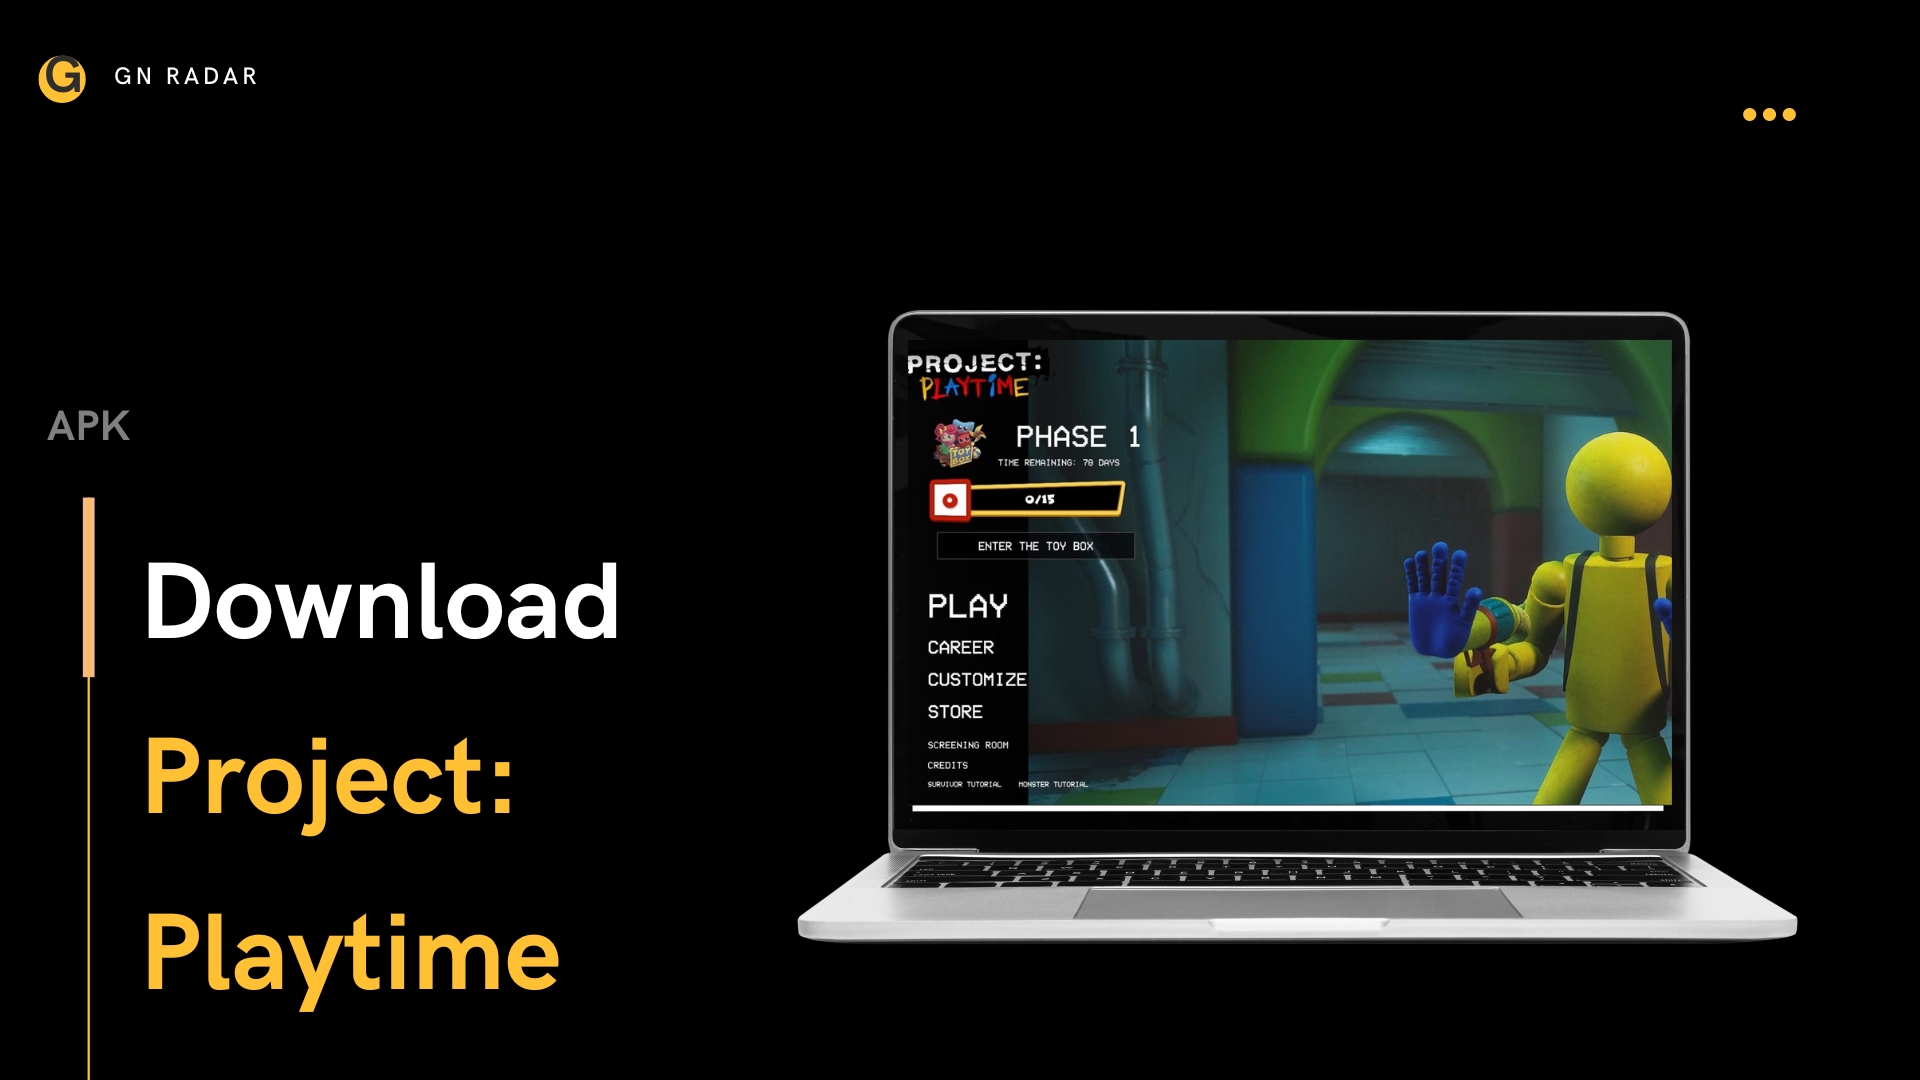 Download Multiplayer Project Playtime android on PC